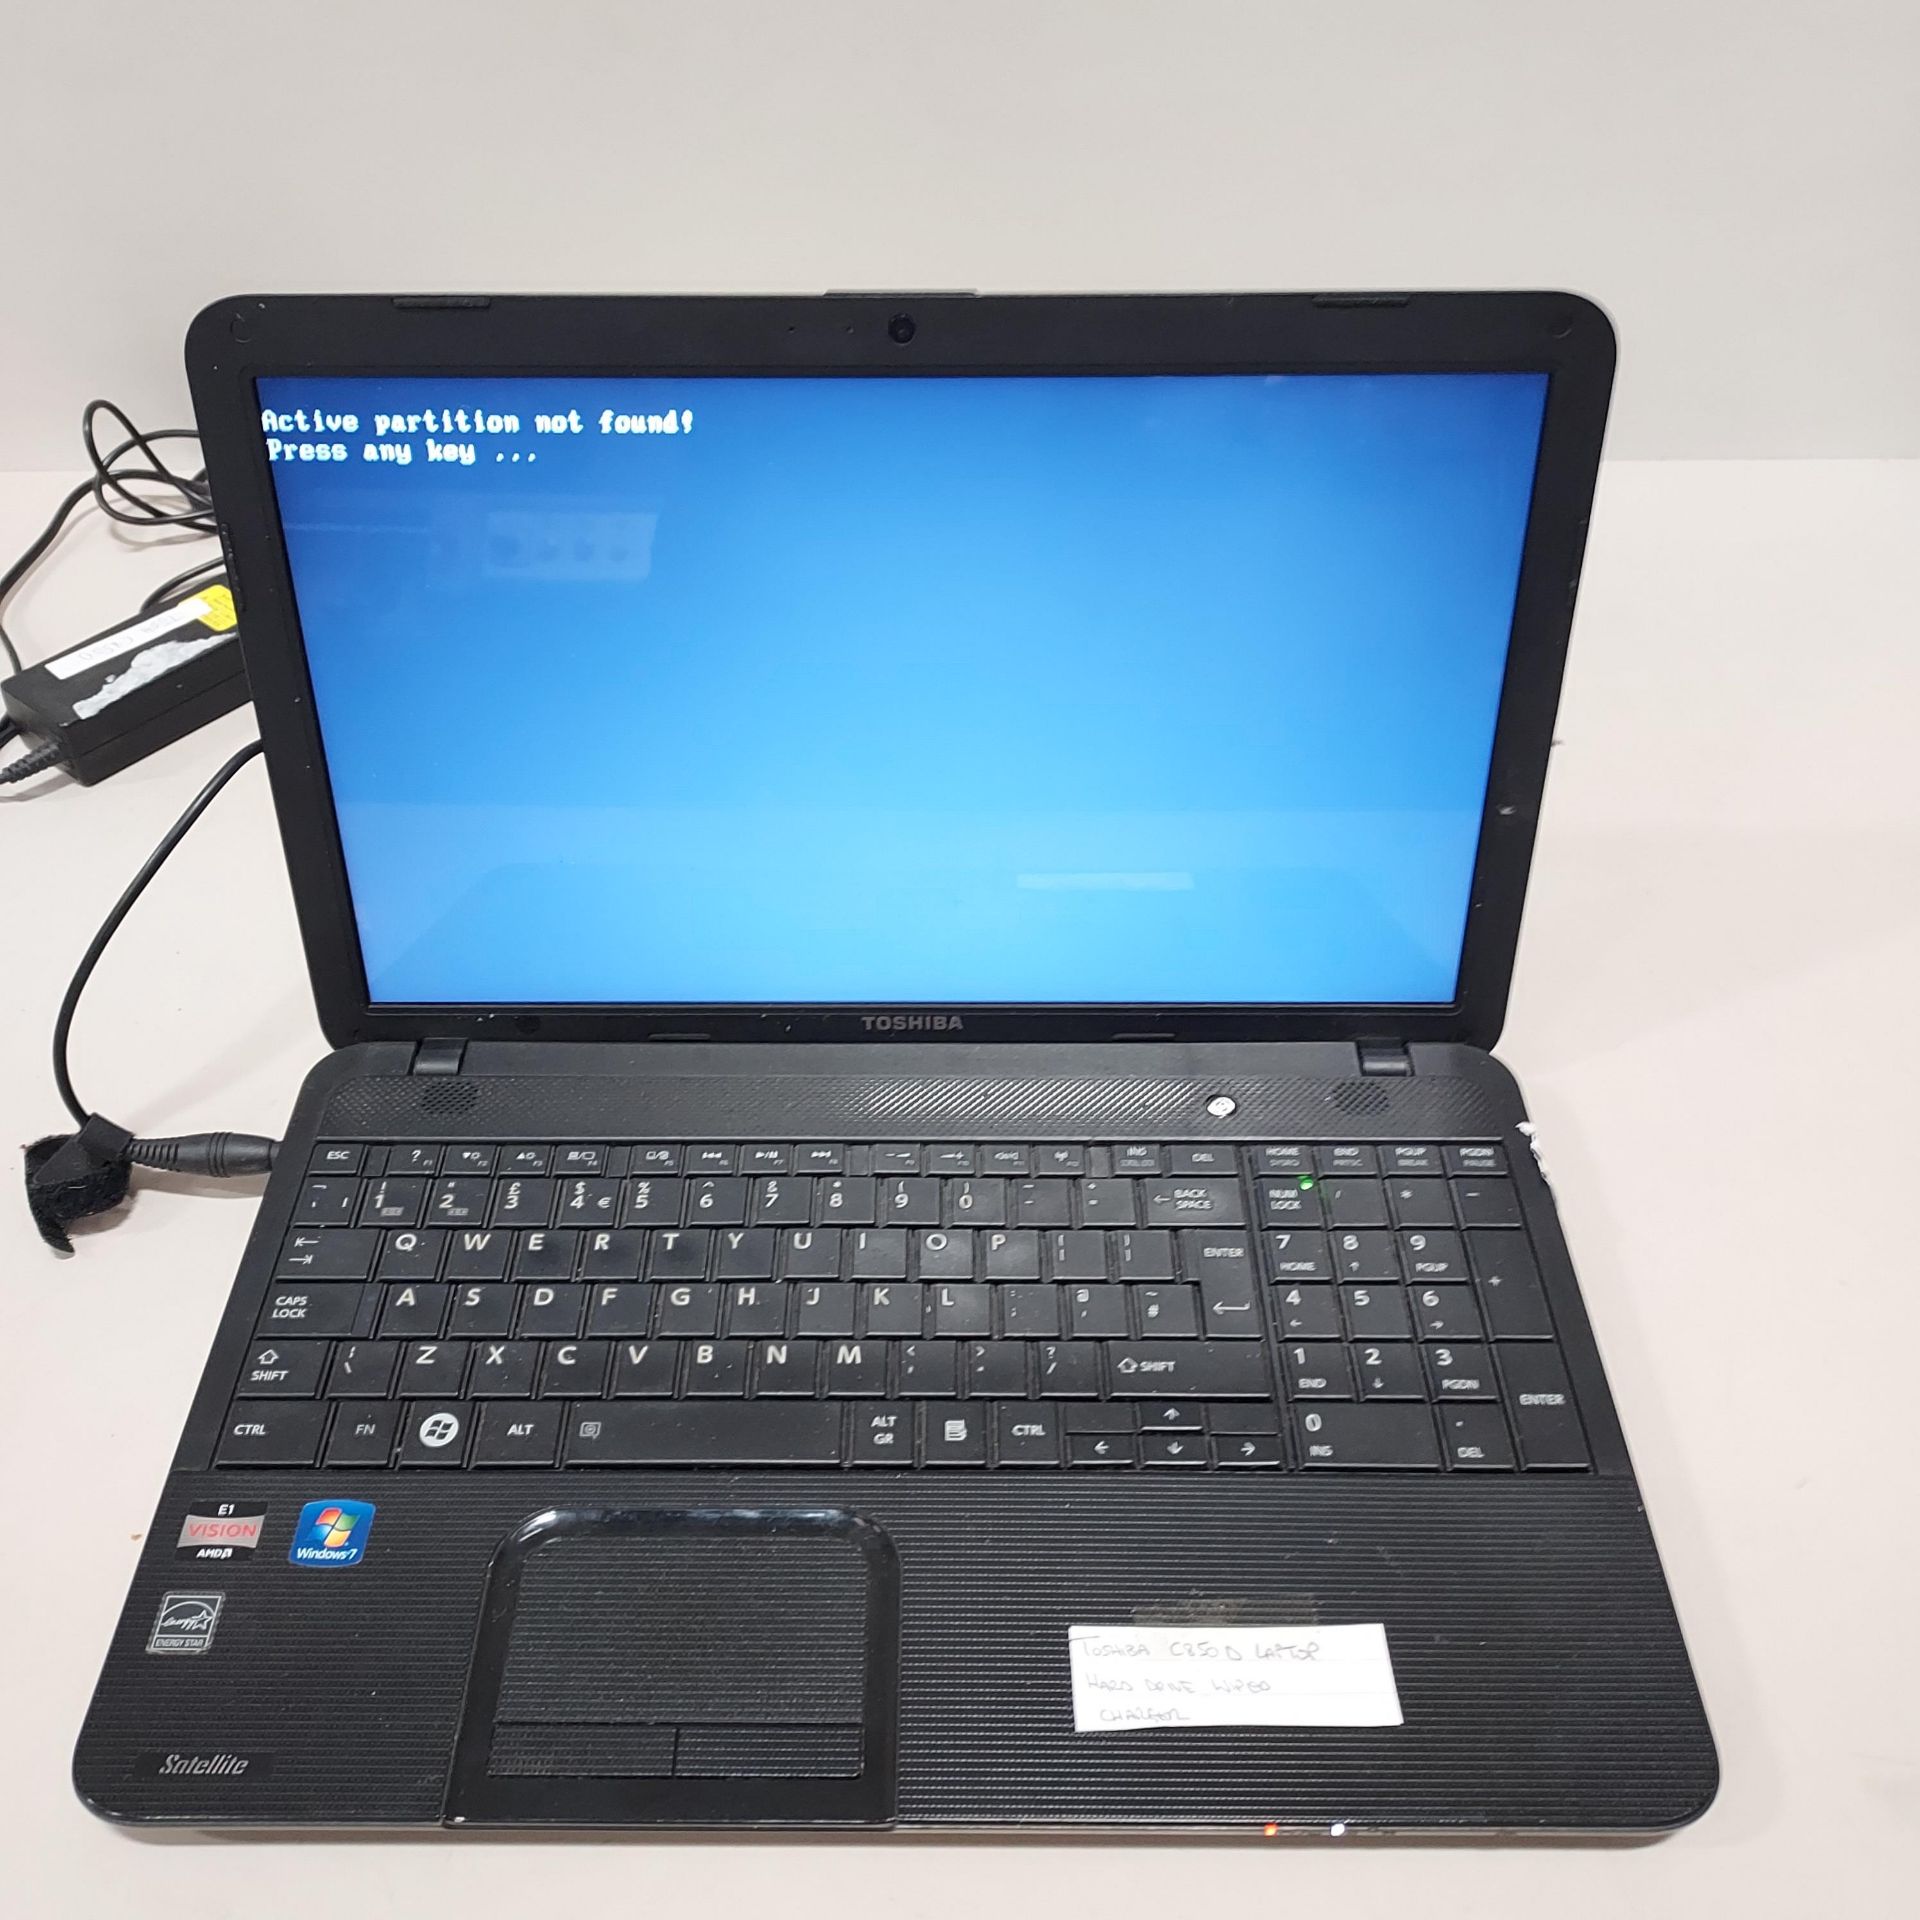 1 X TOSHIBA C850 D LAPTOP - HARD DRIVE WIPED - NO OS - WITH CHARGER